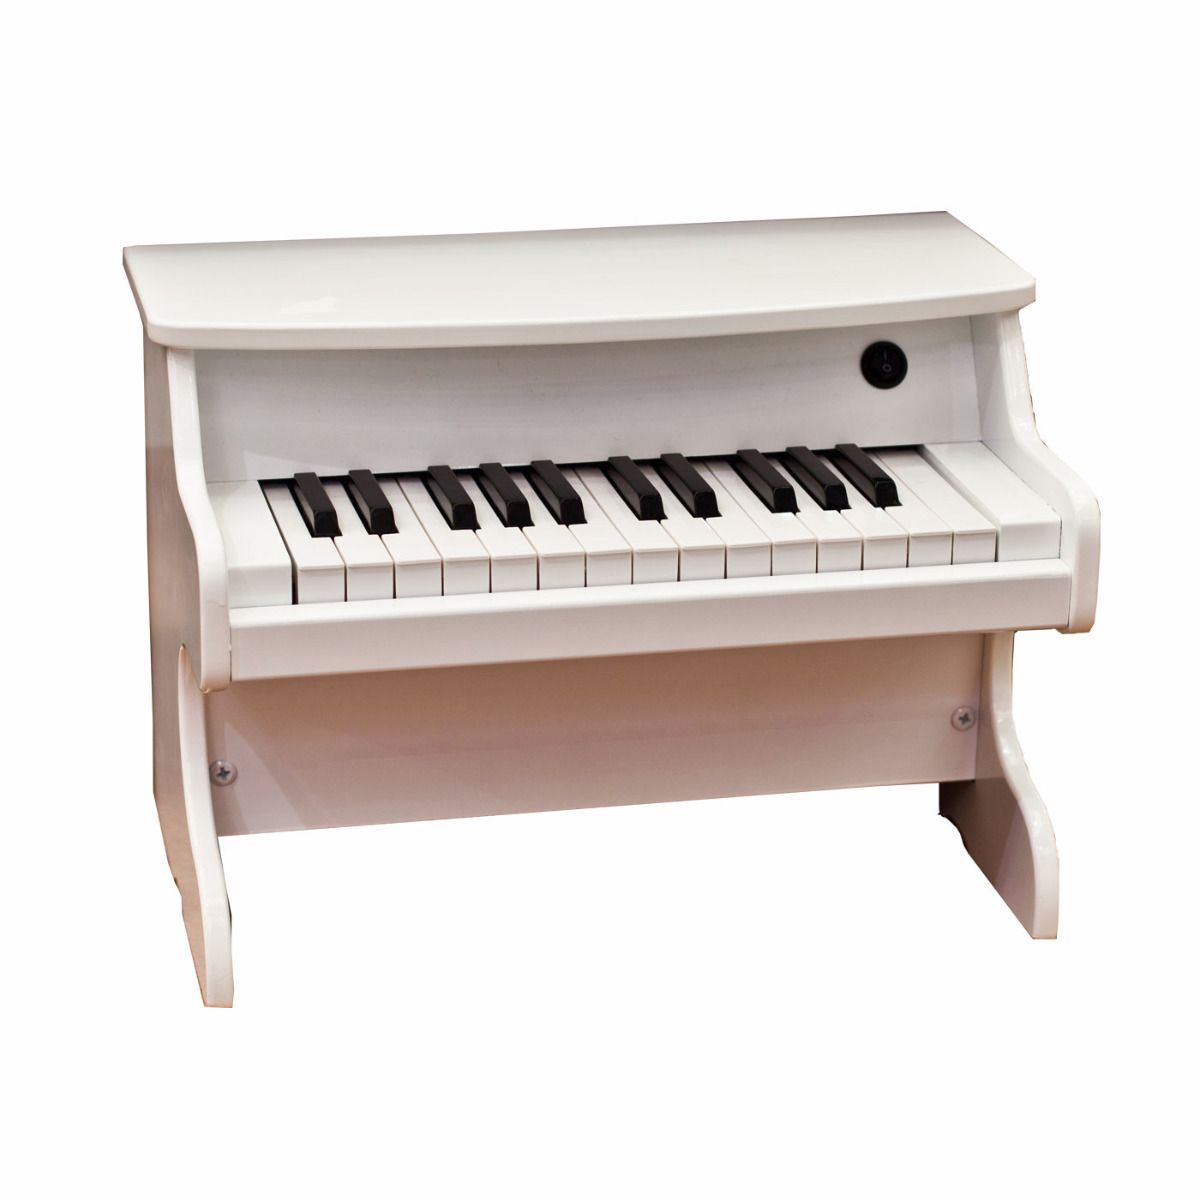 CHASE CDP-121 Mini Digital Piano In High Gloss Colour Finishes